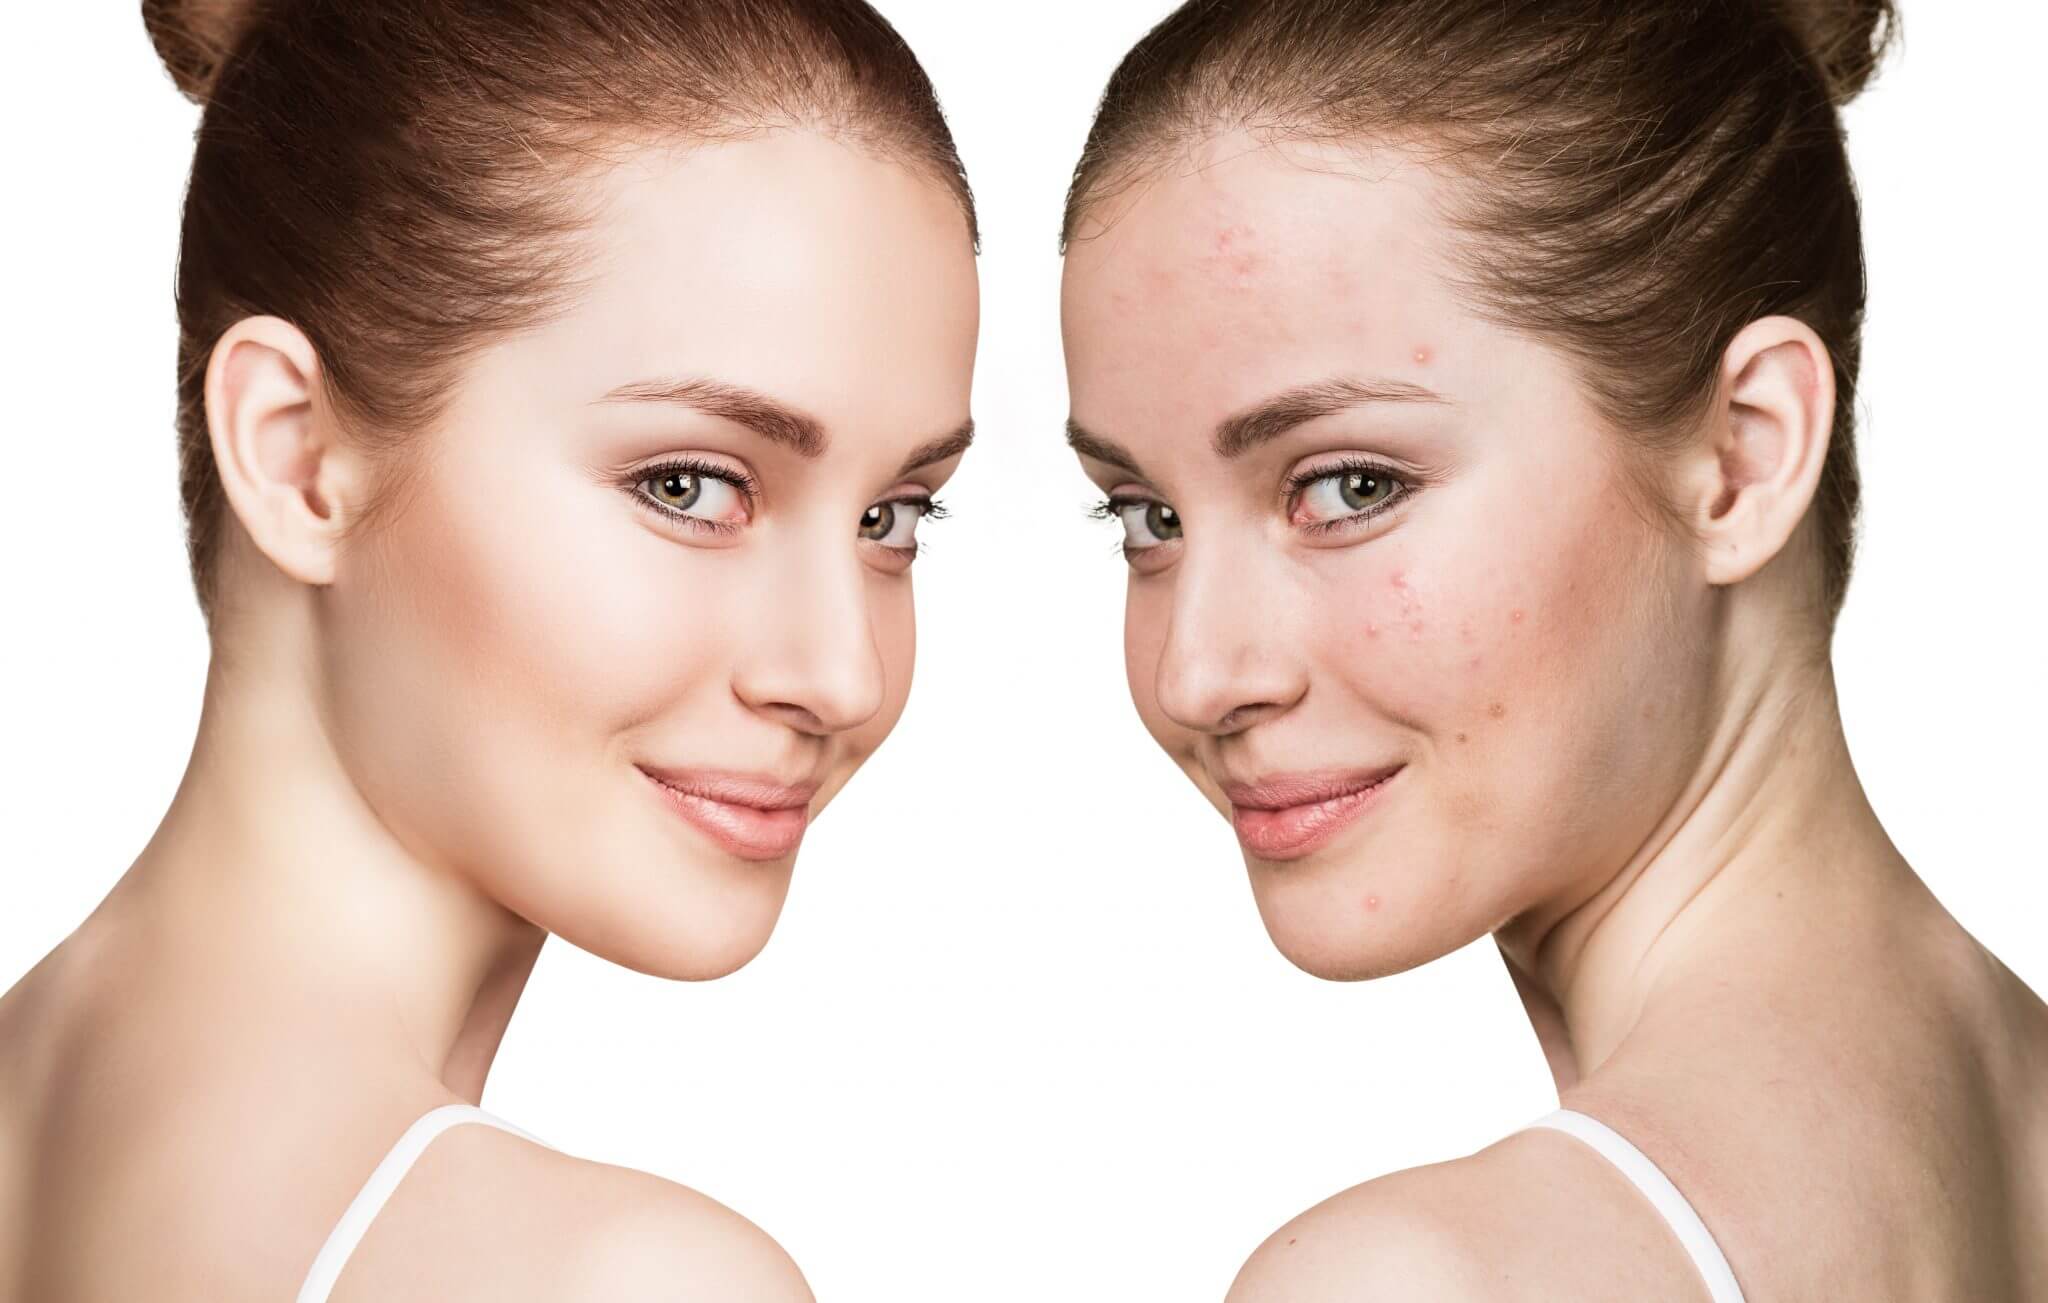 women with acne then no acne